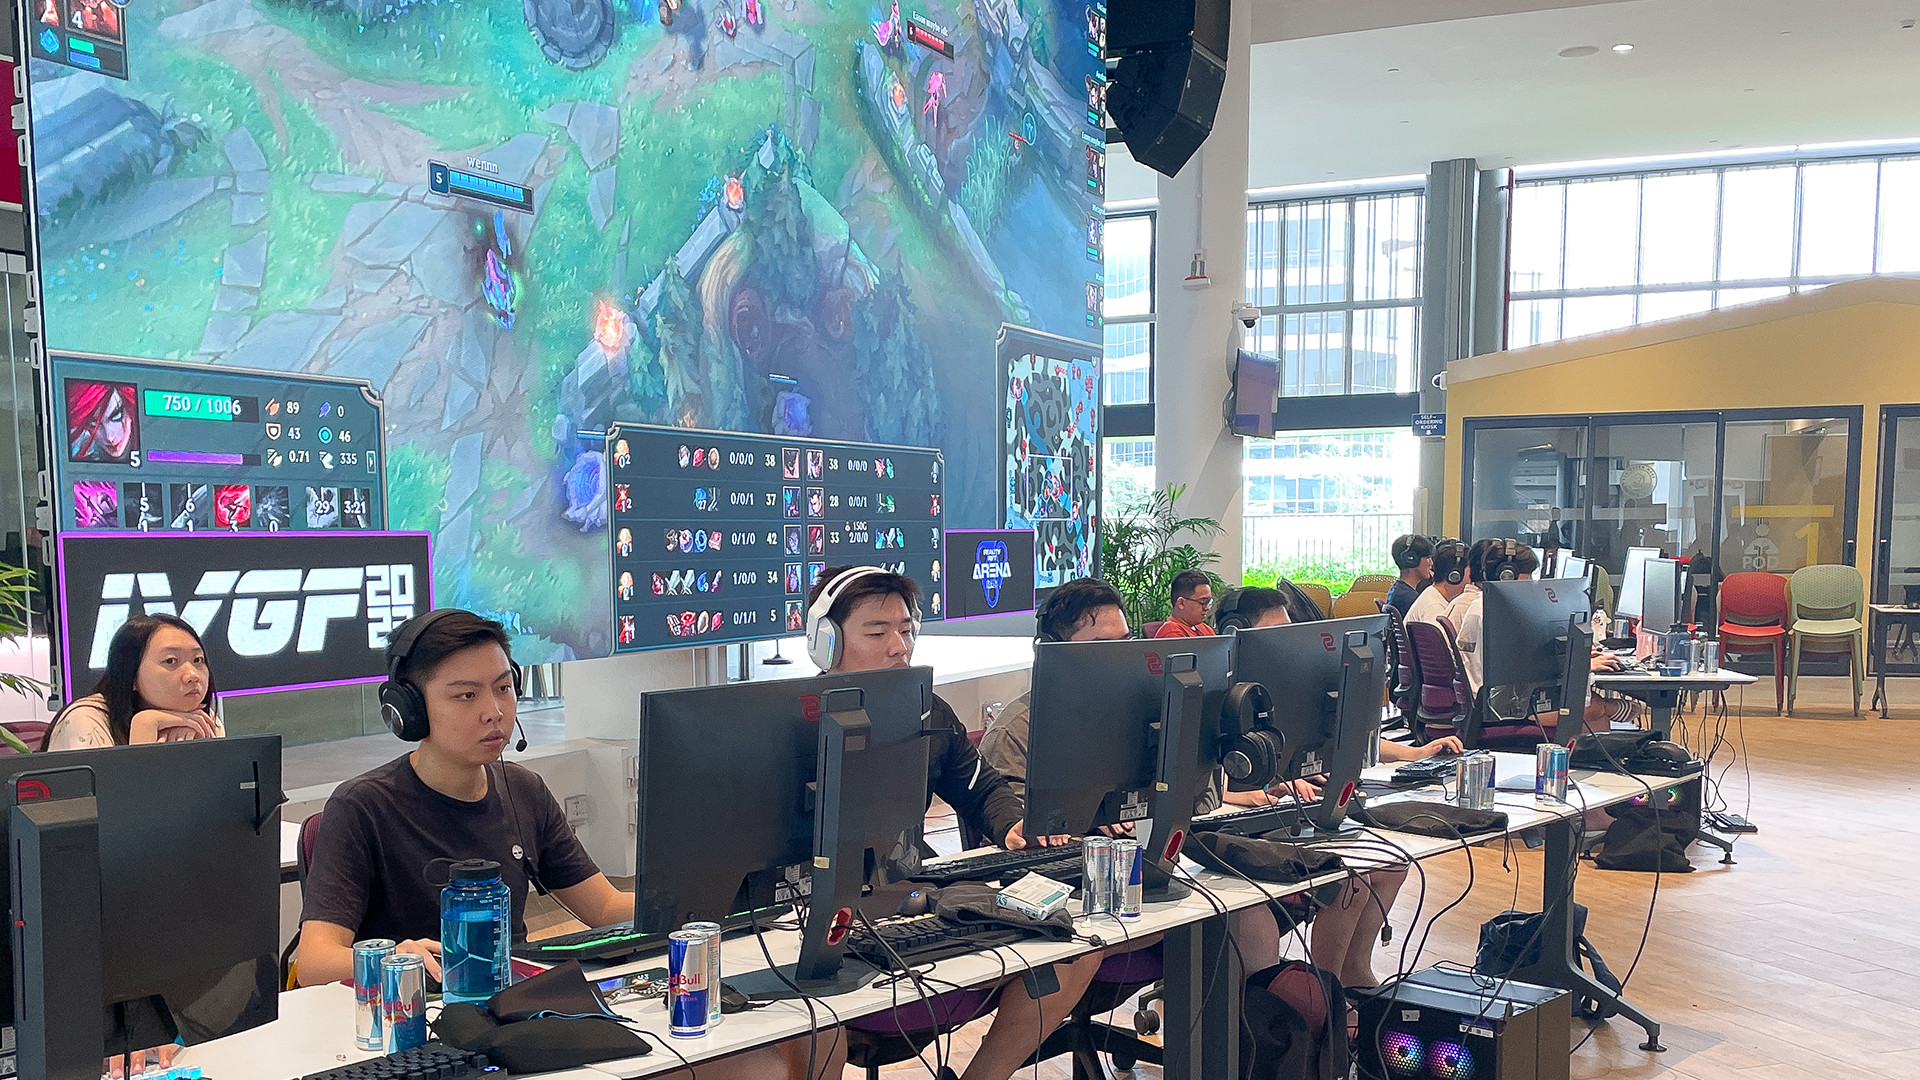 Two NUS teams battled it out for the top spot at the League of Legends finals.